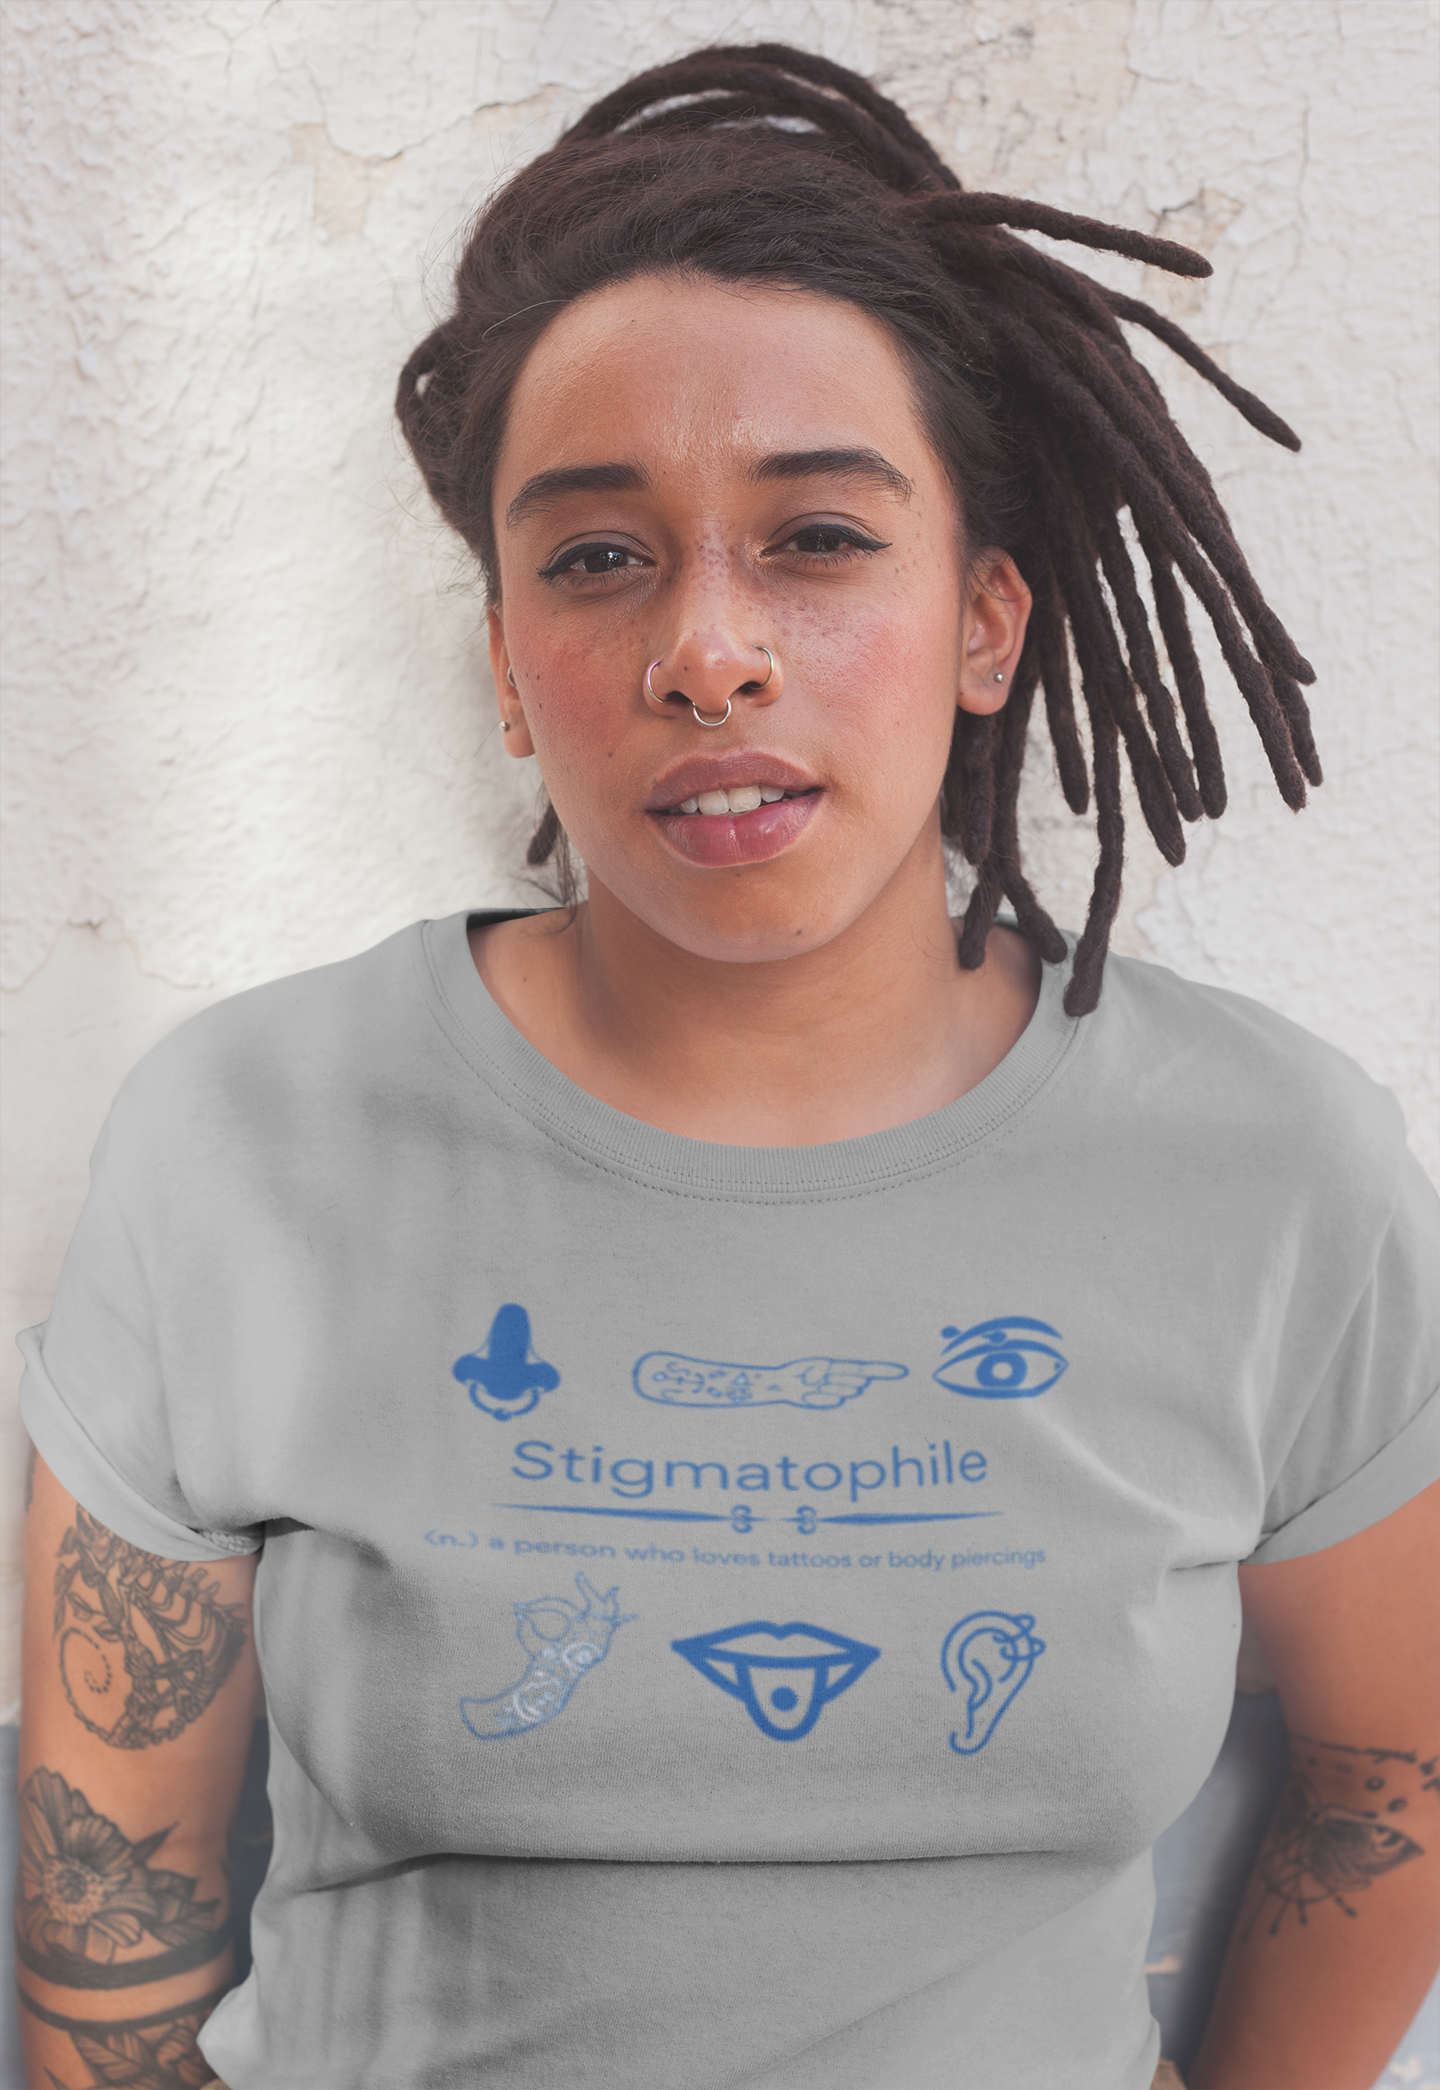 Stigmatophile - tattoos and piercings lover T-shirt